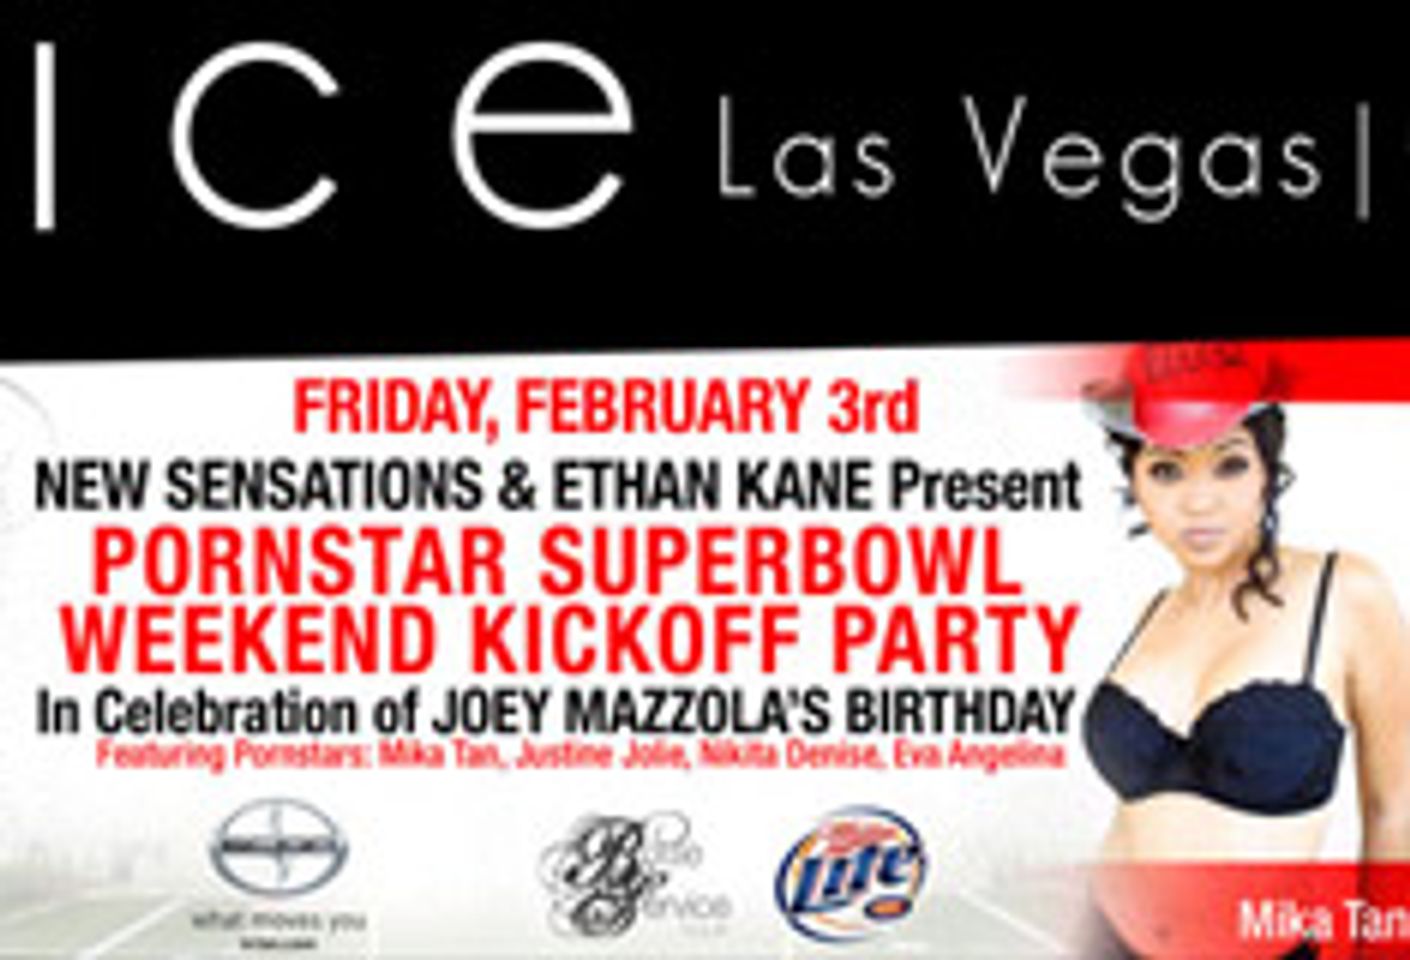 Porn Star Super Bowl Kickoff Party in Vegas